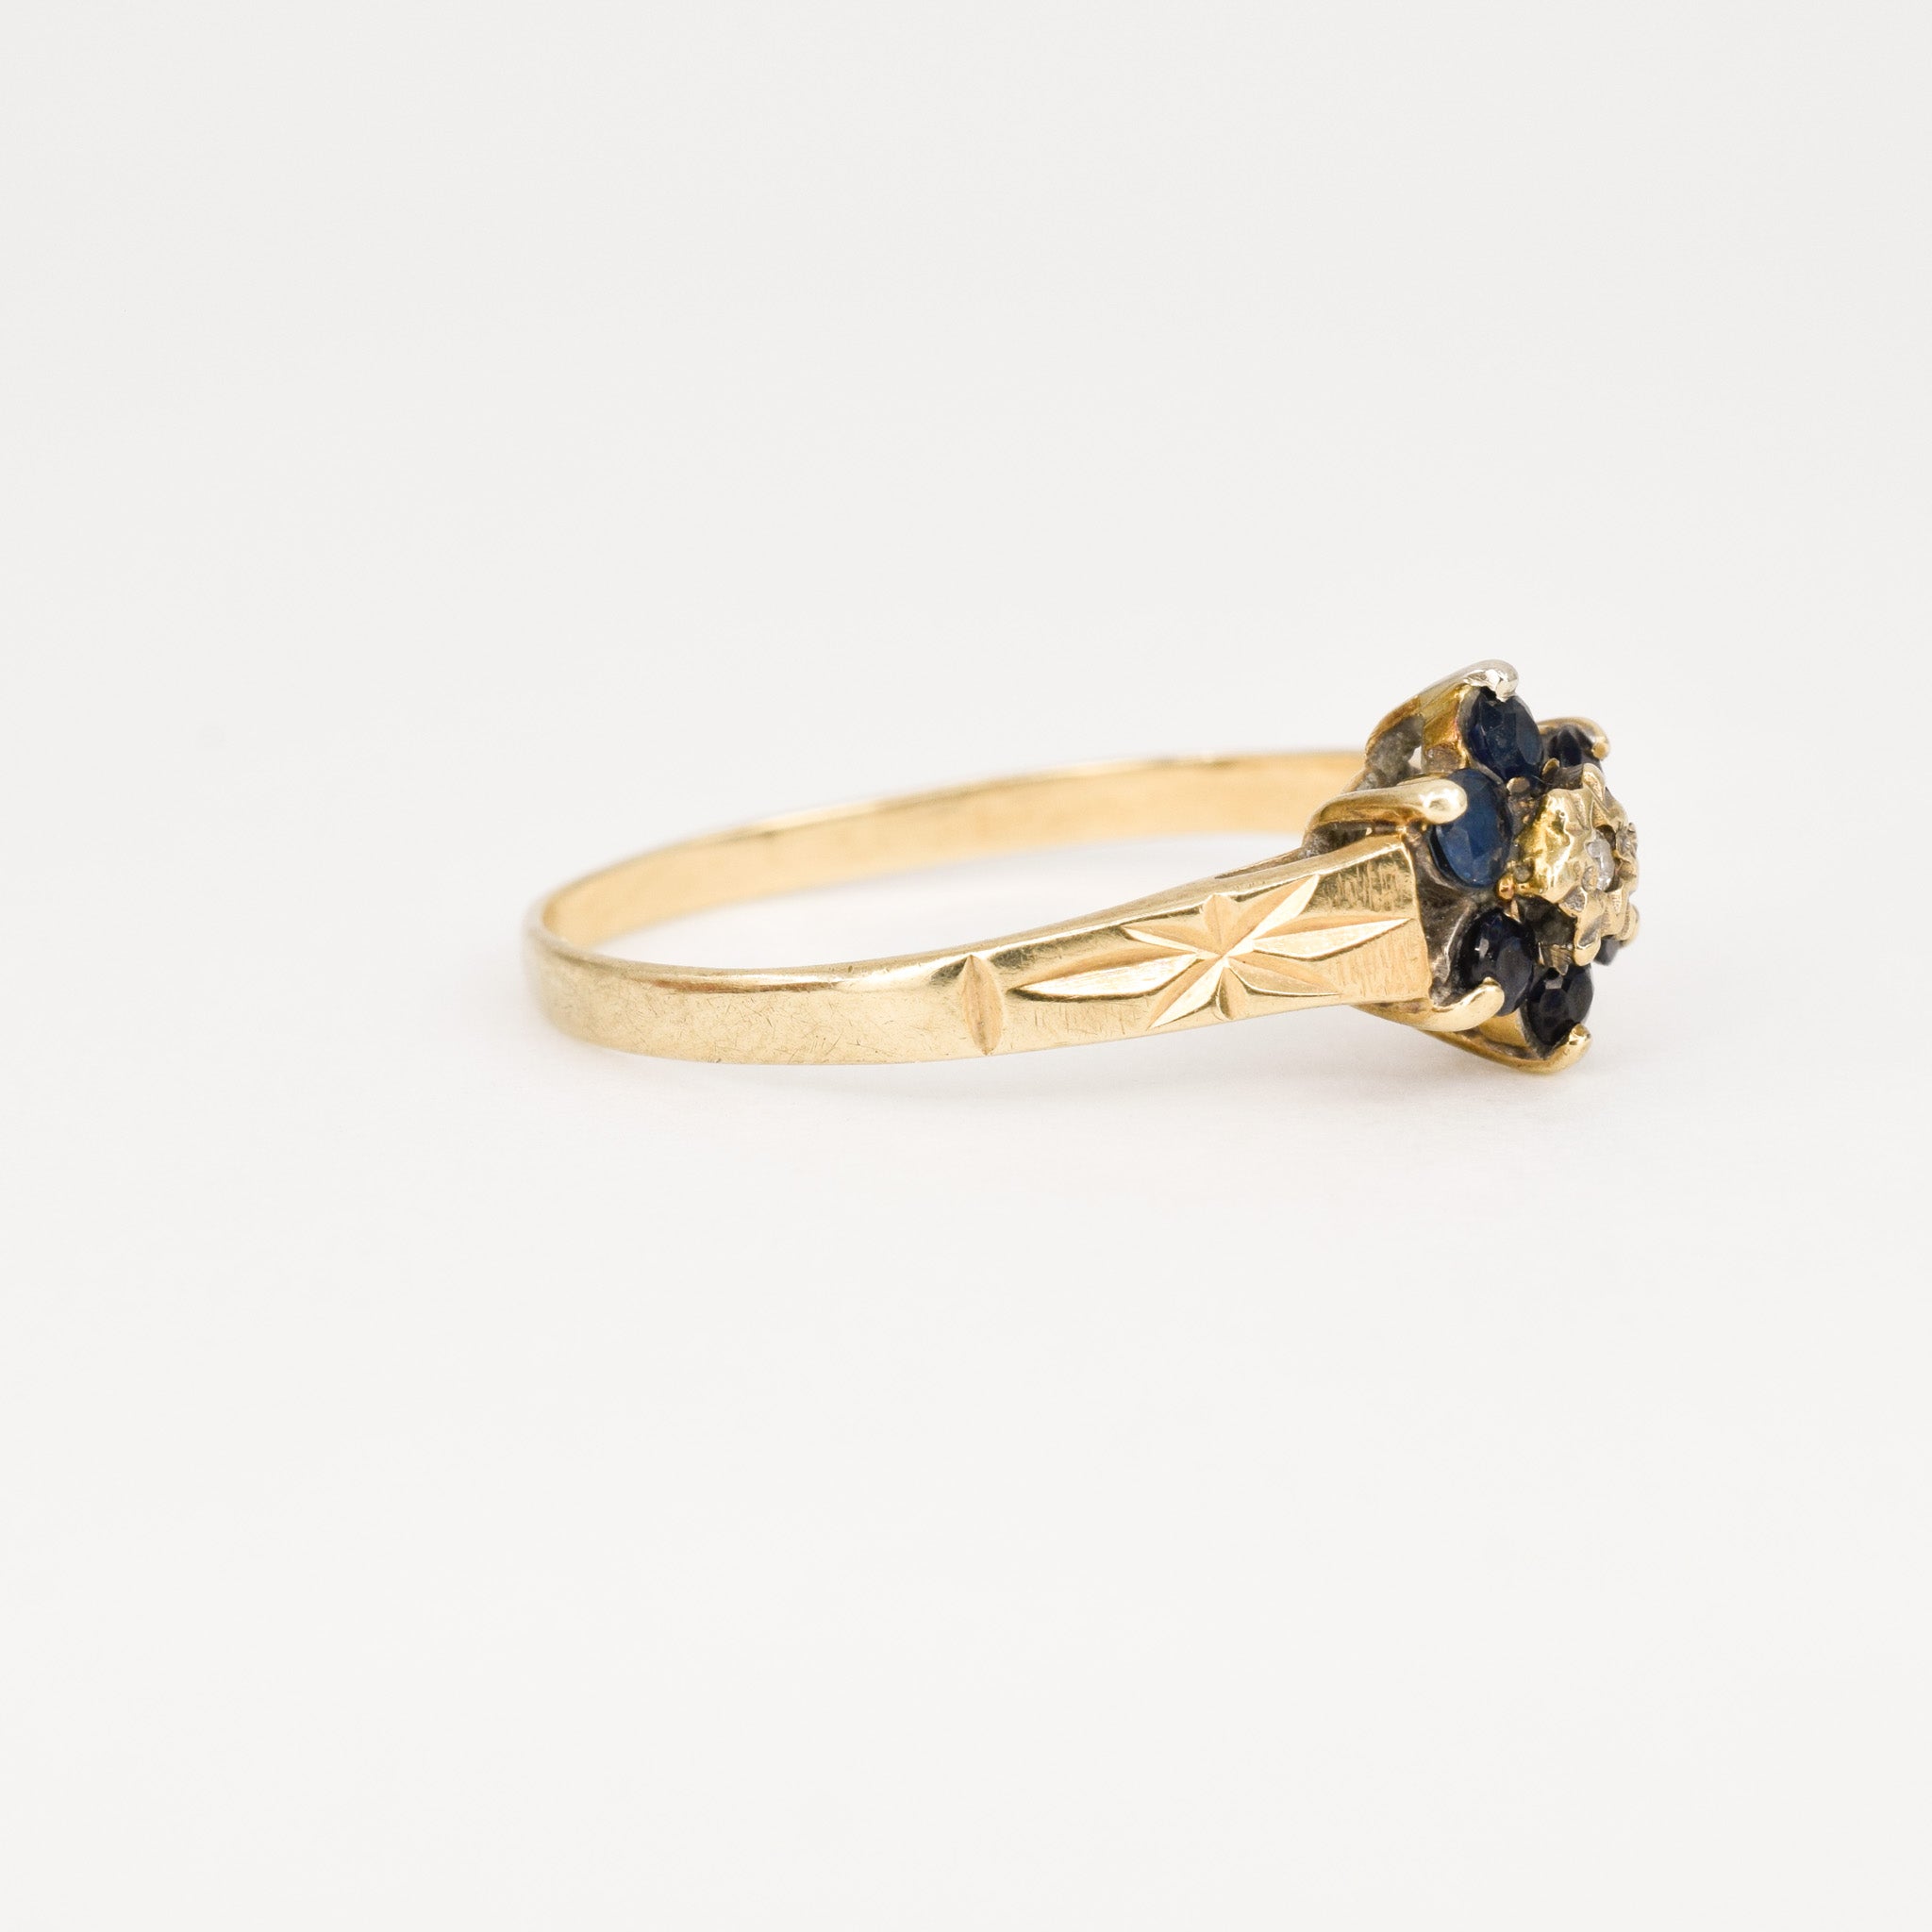 vintage sapphire and diamond floral ring, folklor vintage jewelry canada